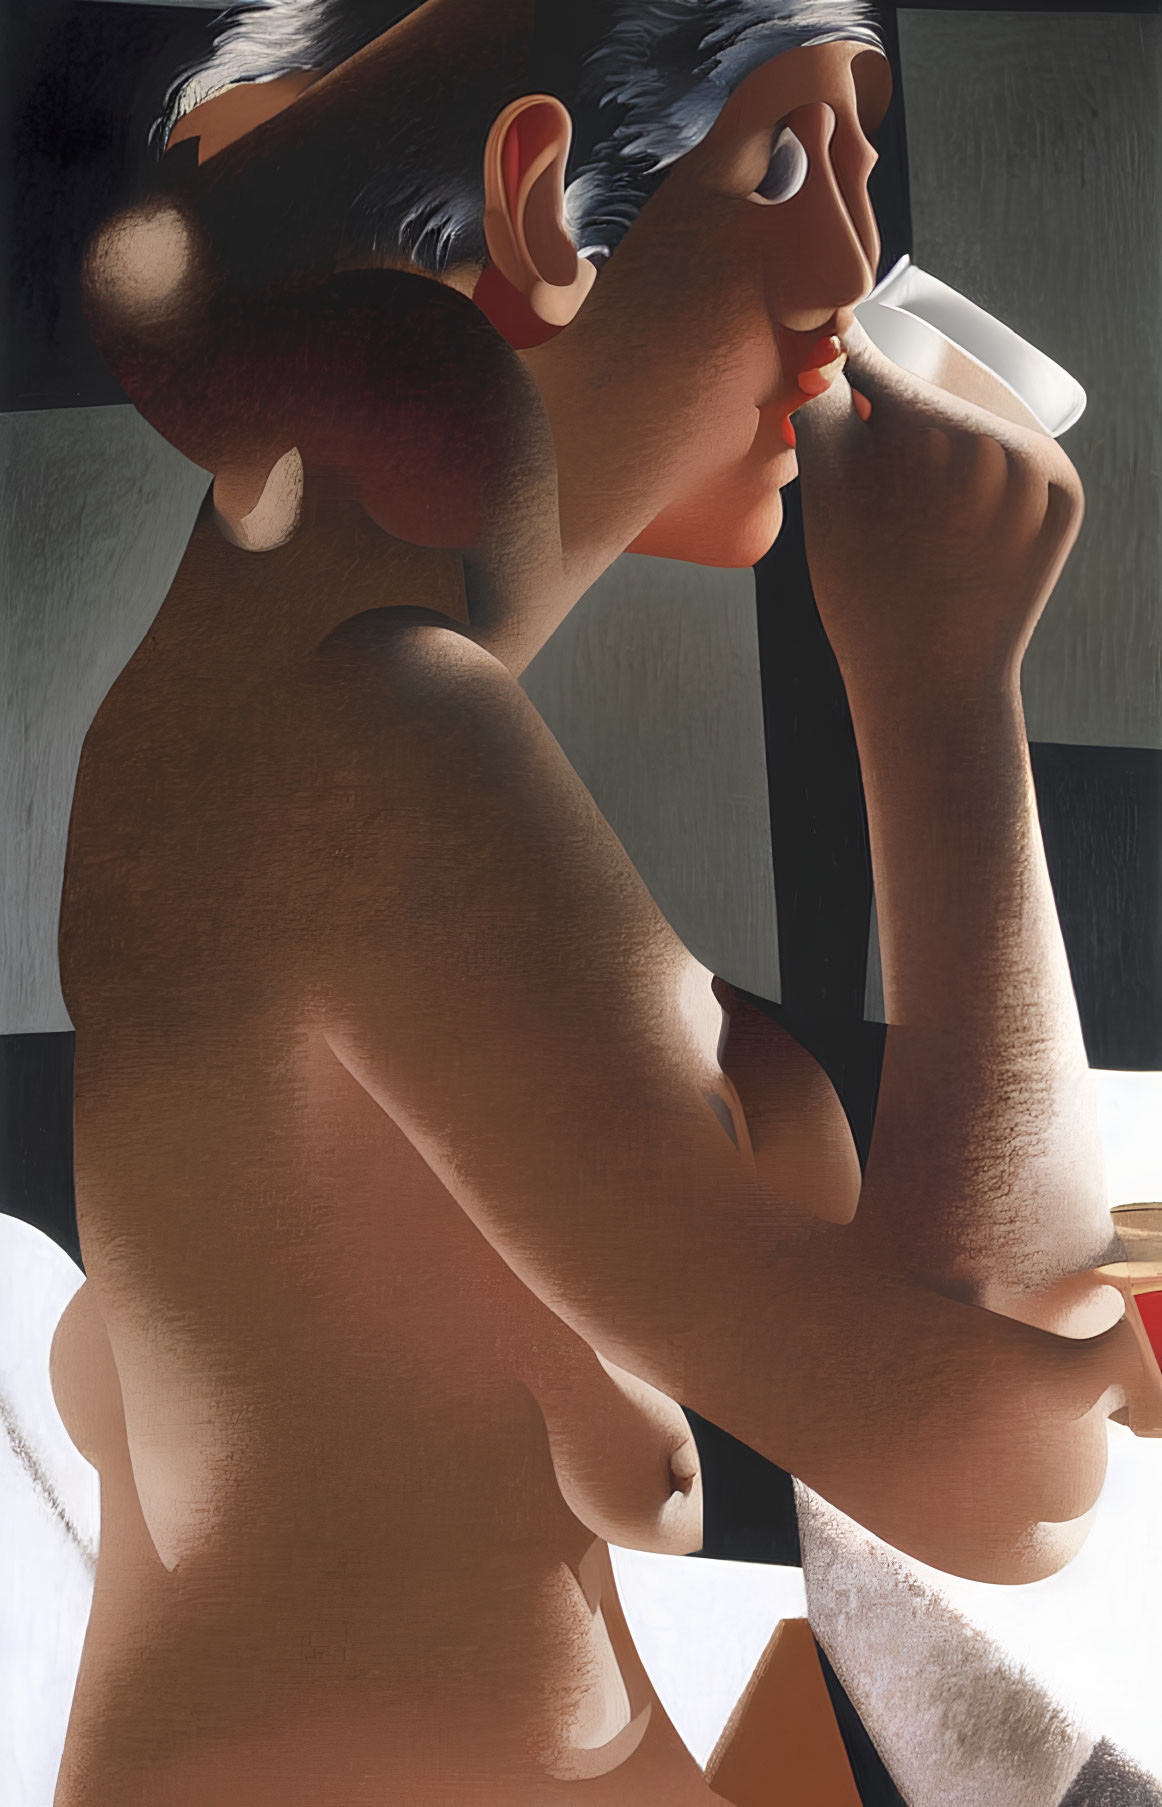 Stylized painting of woman drinking with sharp contrasts